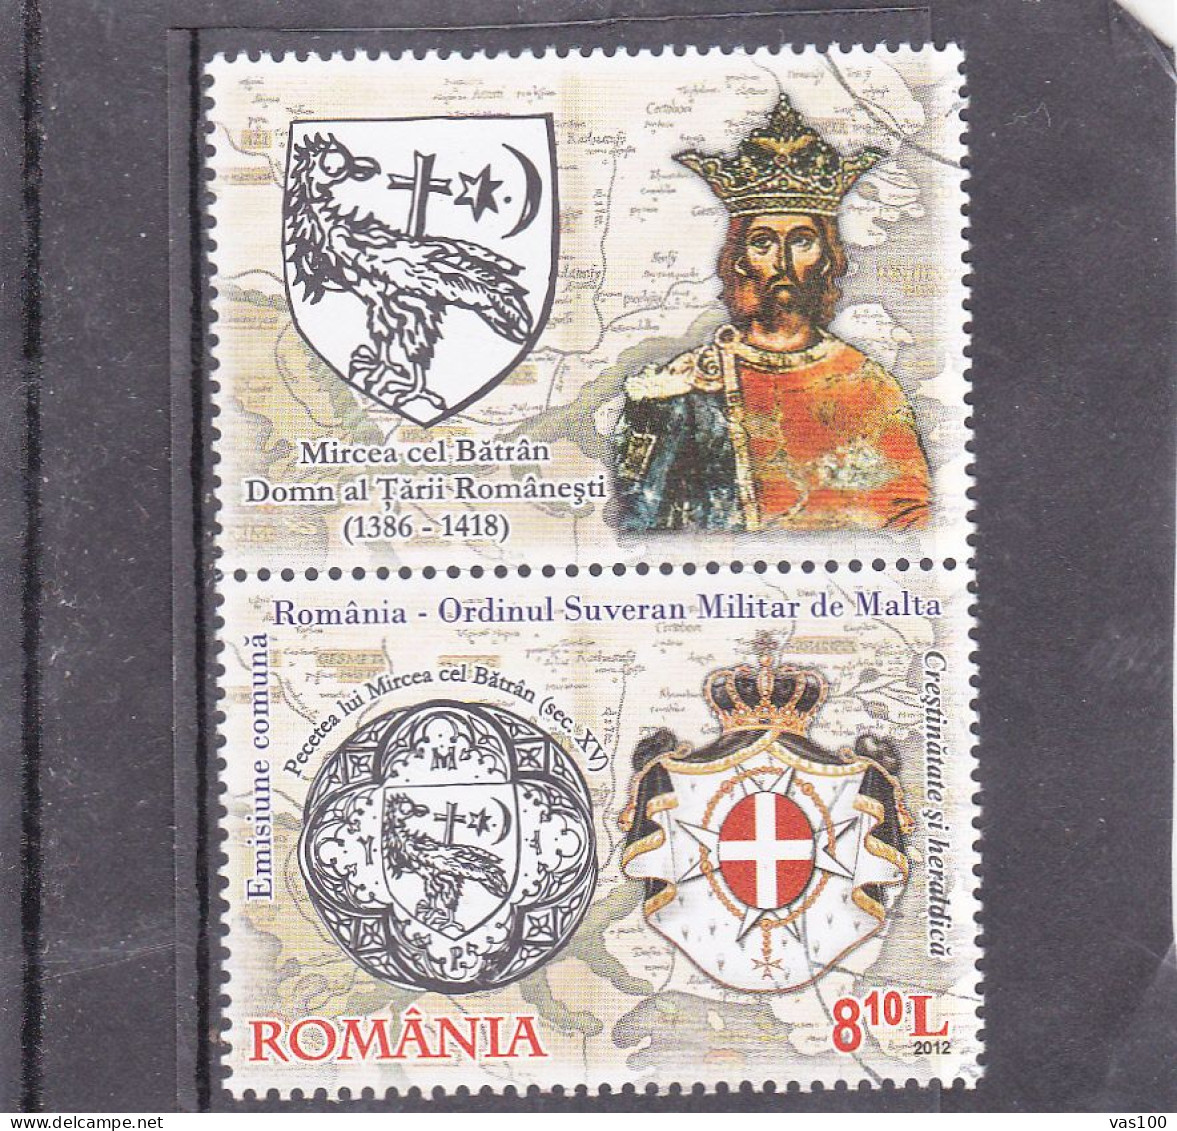 ROMANIA 2012 Relations With Sovereign Maltese Order USED + LABELS. Michel 6667 - Usado